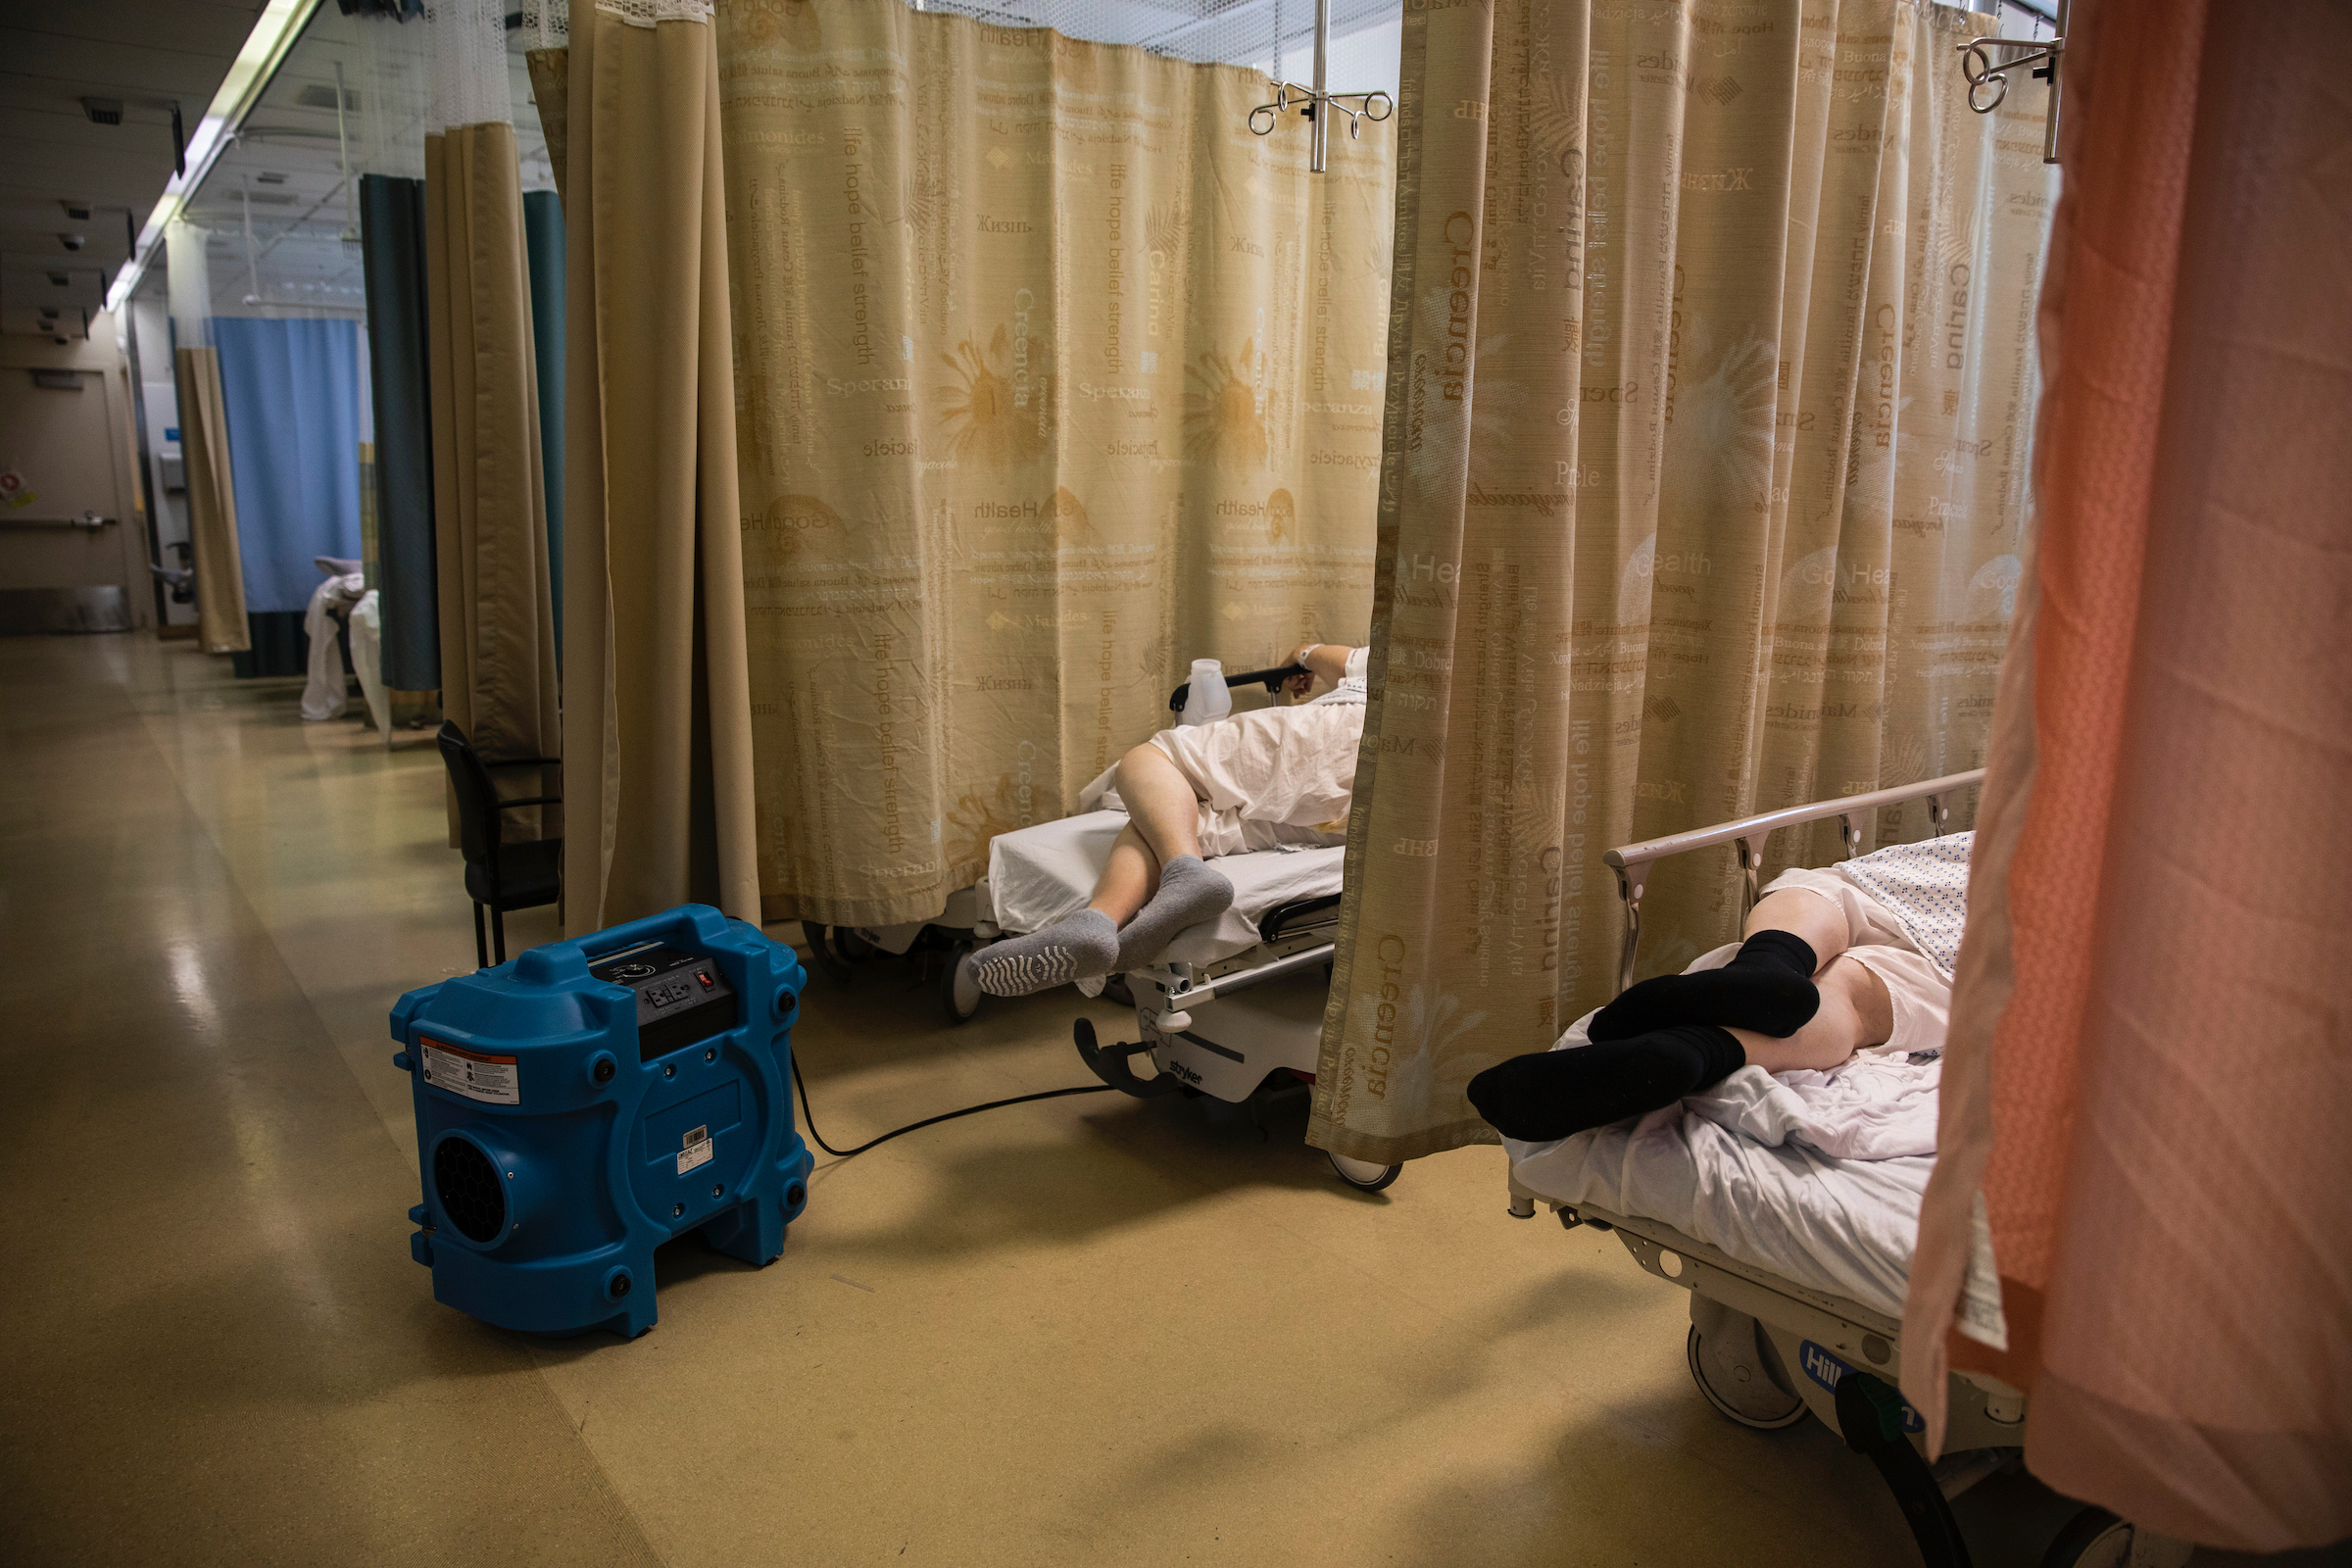 A COVID-19 patient rests with an air-purifying unit in the emergency room of Maimonides Medical Center in Brooklyn on March 26, 2020. (Benjamin Norman for TIME)